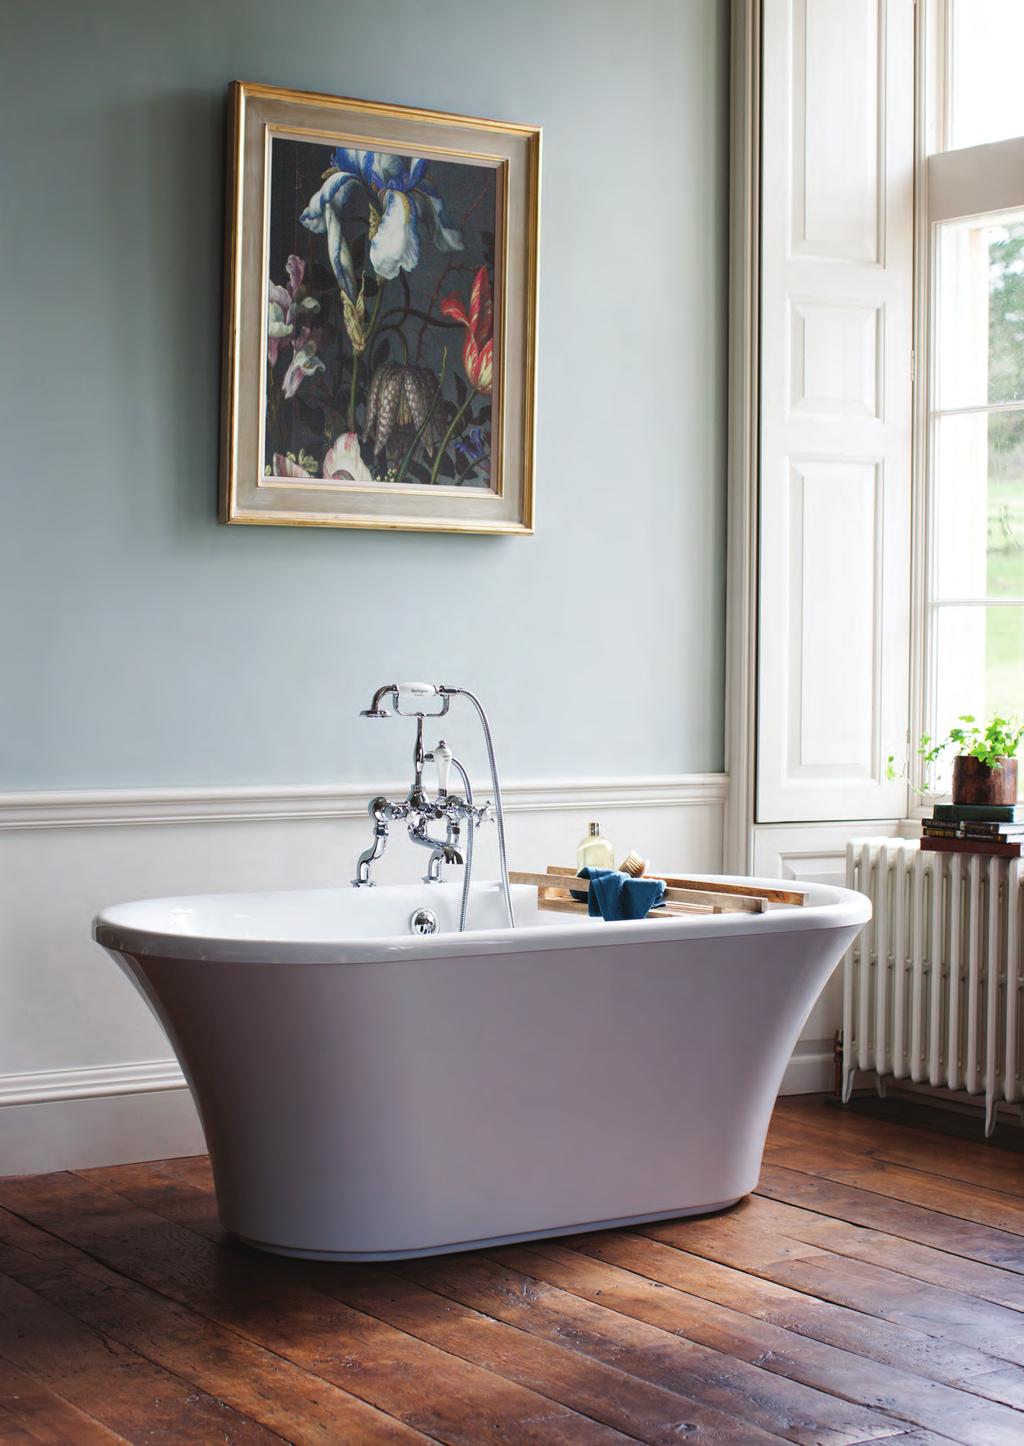 DOUBLE ENDED BATHS - BRINDLEY BATHS BATHS BRINDLEY This graceful tub is an elegant addition to any bathroom and provides the perfect